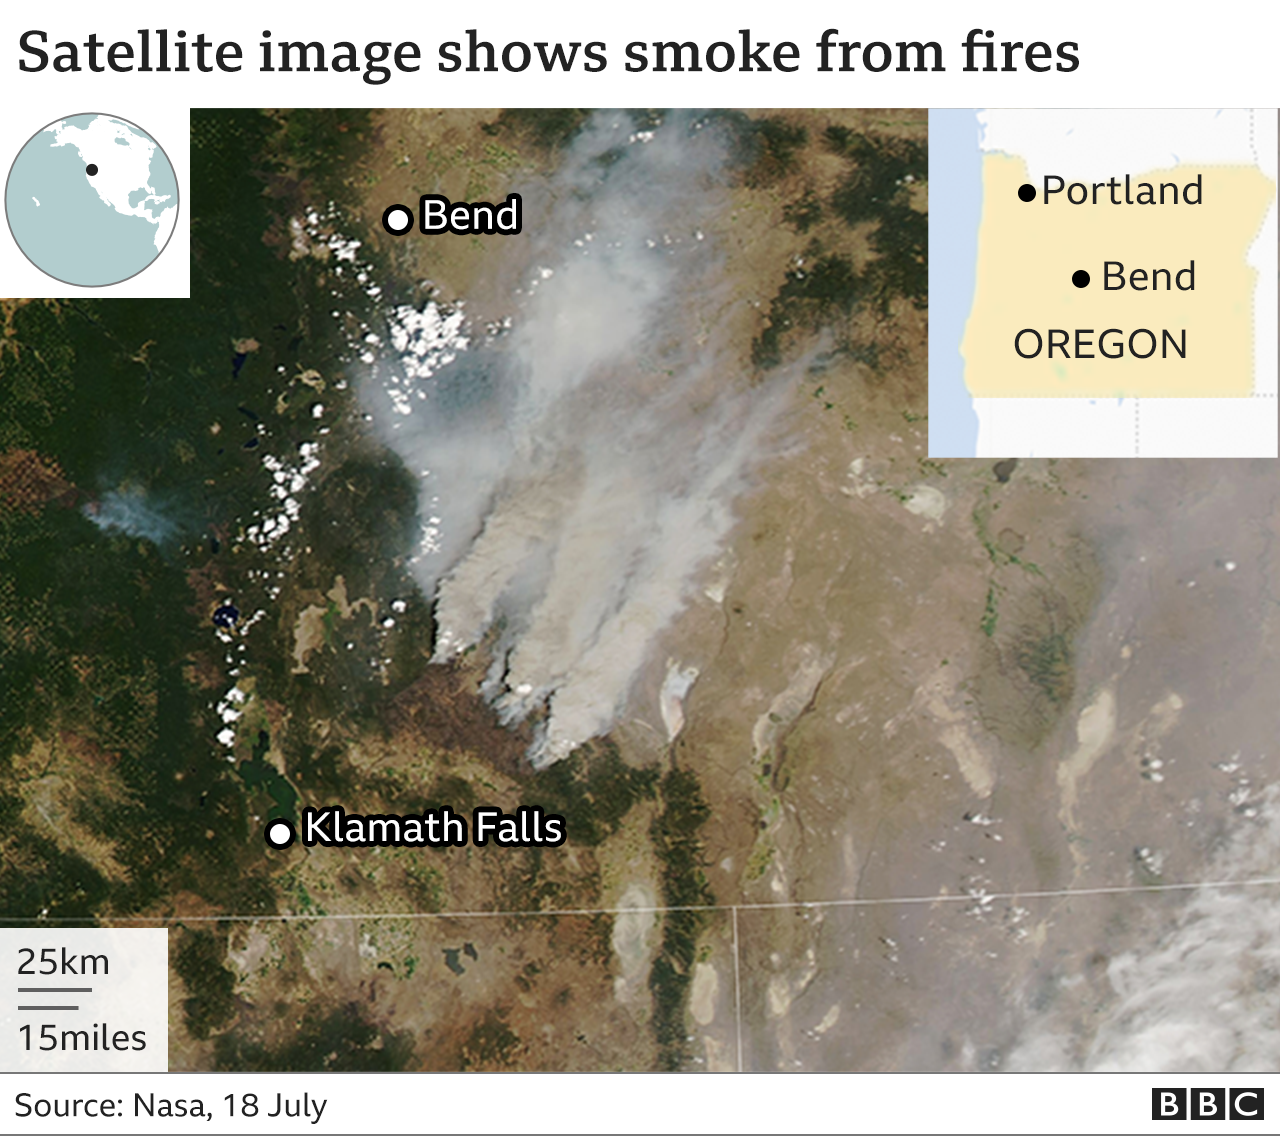 A Nasa satellite image showing smoke rising from the wildfires near Bend in Oregon - 18 July 2021